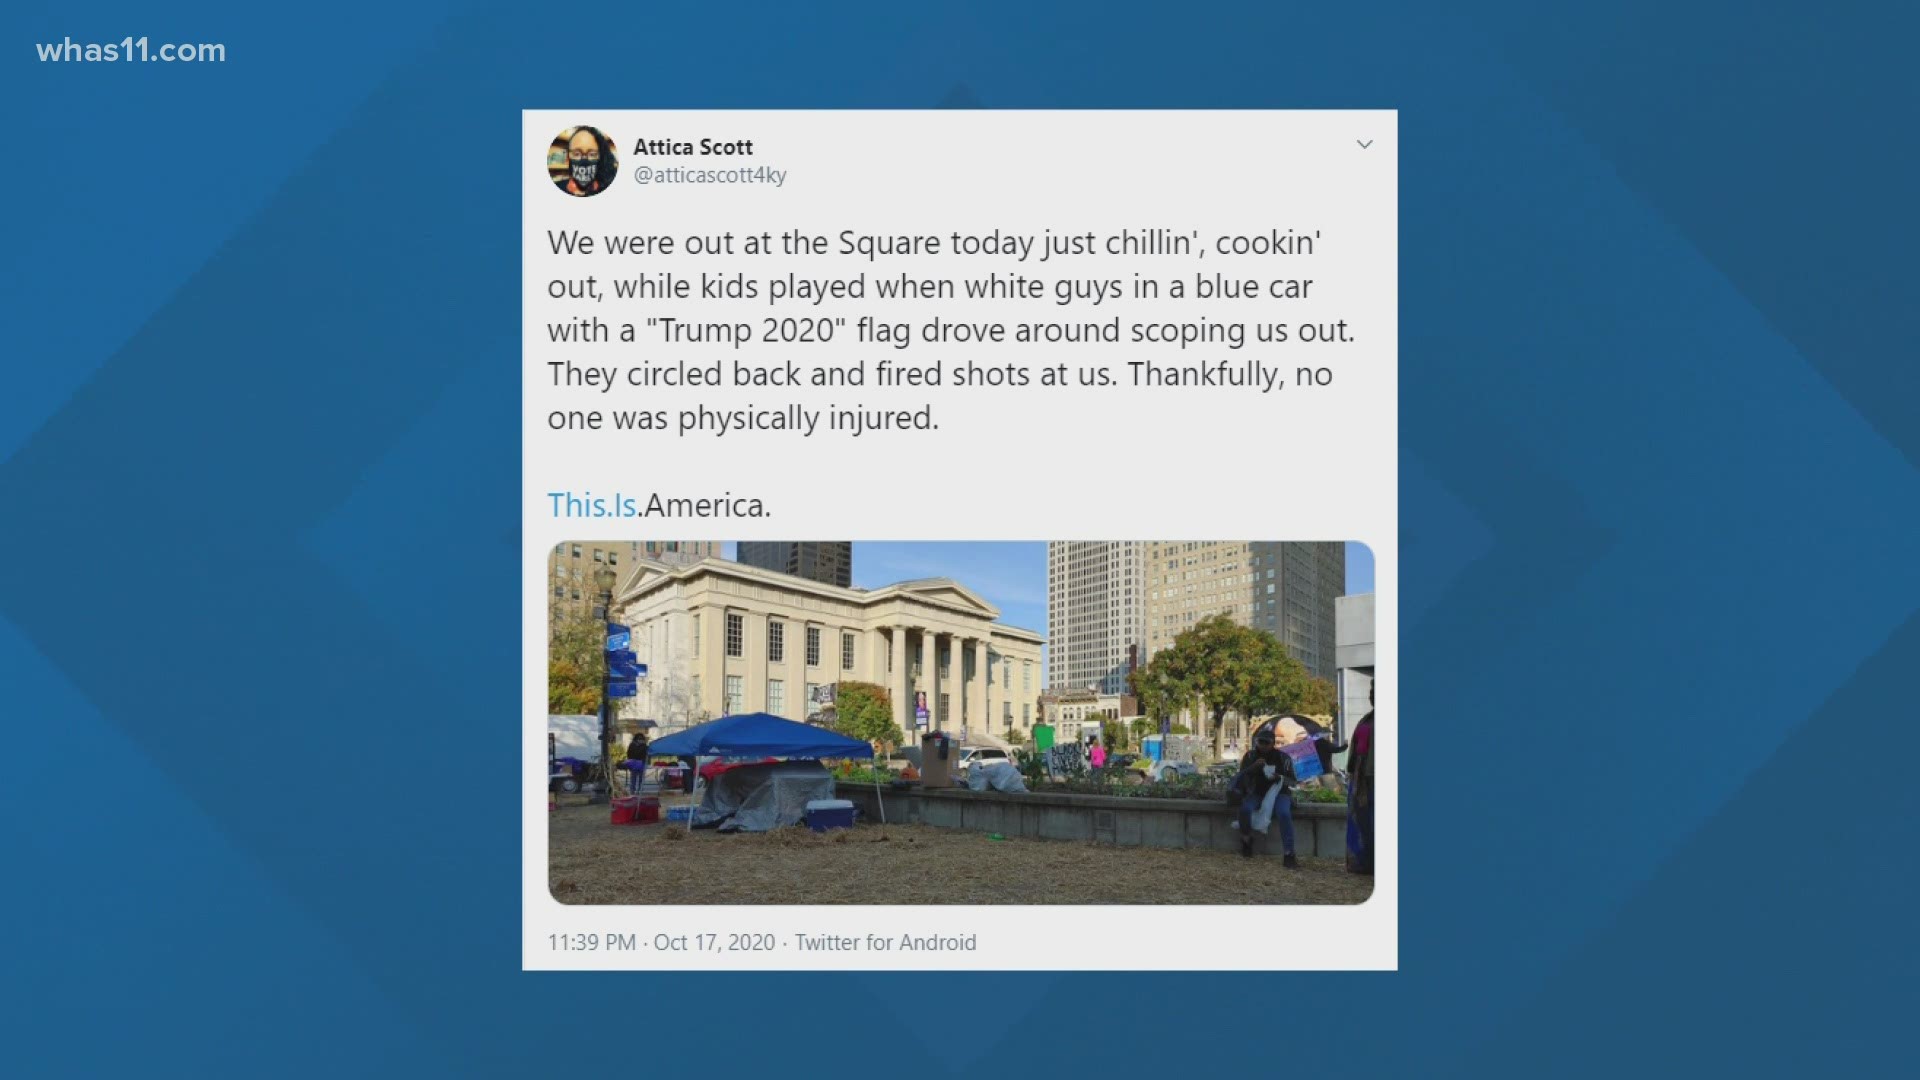 Scott said she was at the park hanging out and grilling while children played when men in a car drove past the park to scope it out and then fired shots.